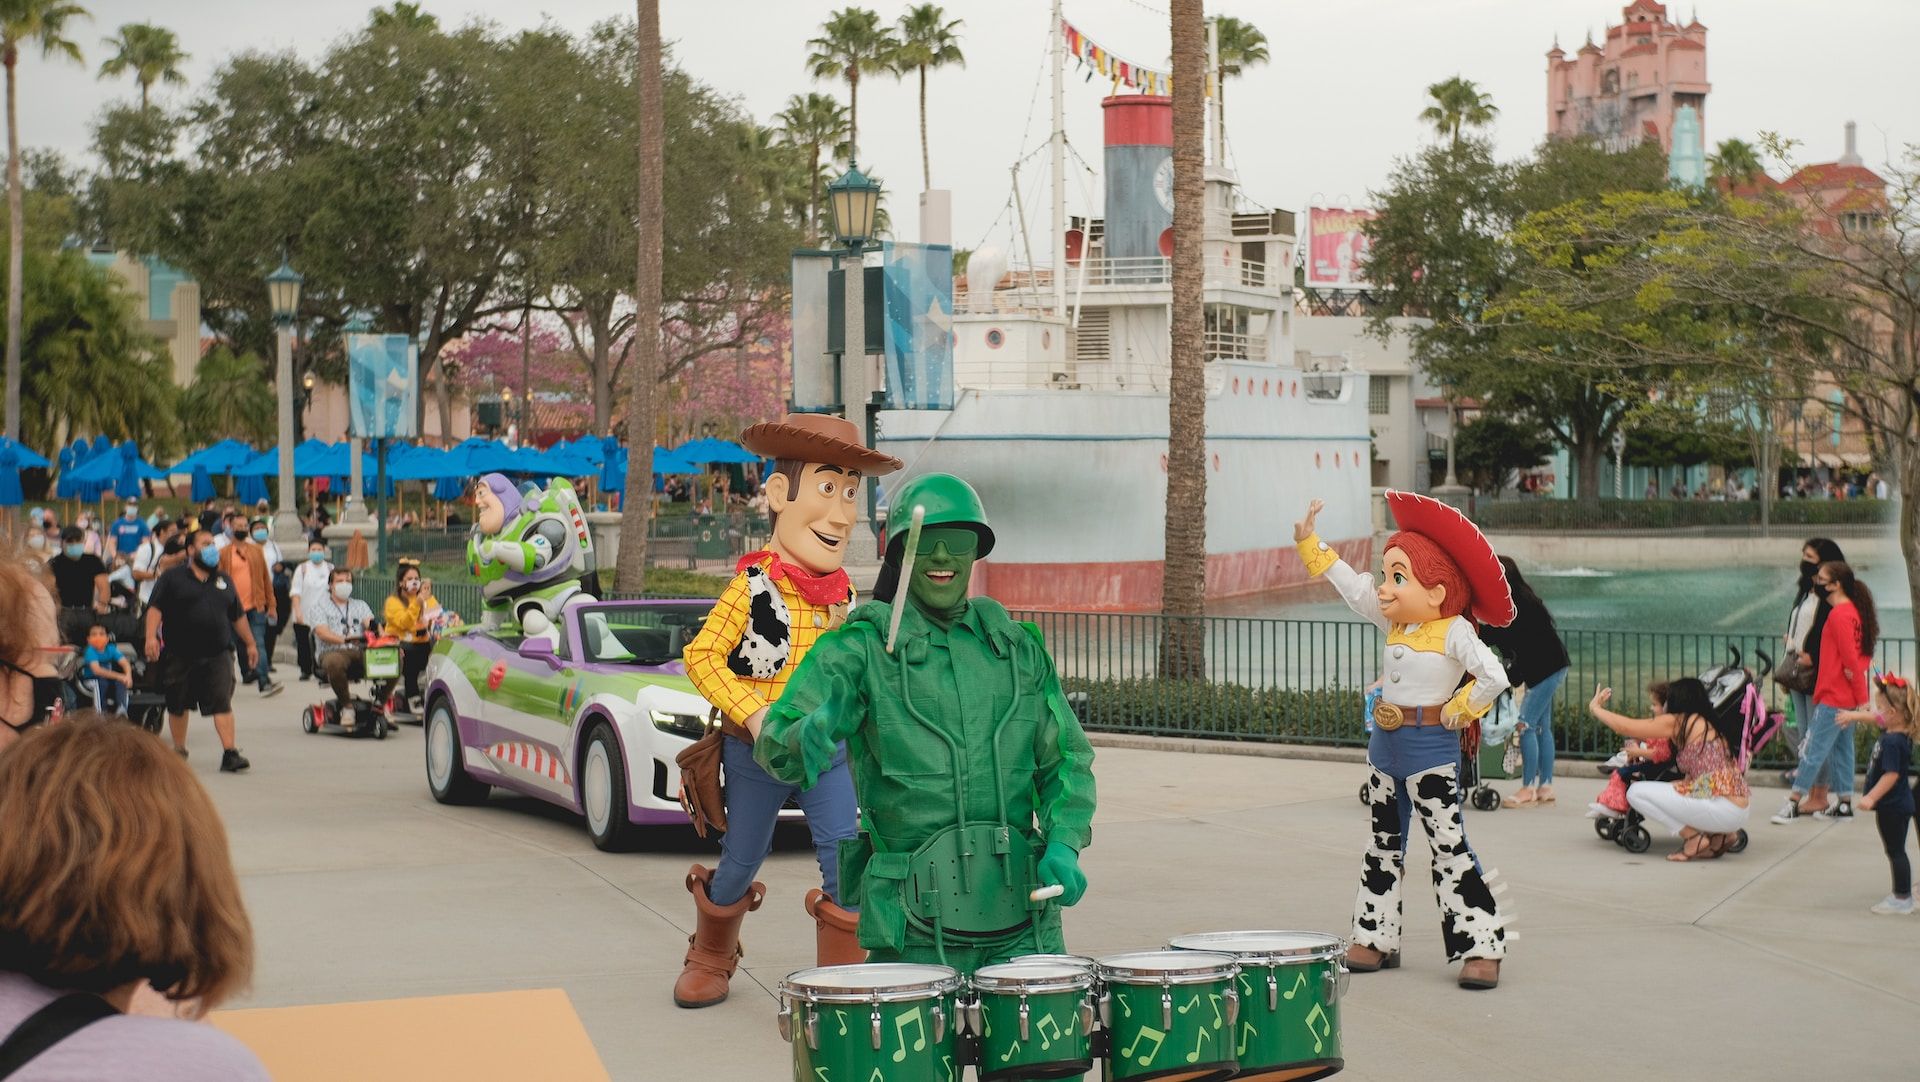 Man In Green Jacket With Several Other People In The Background At Disney World, Orlando, FL, USA